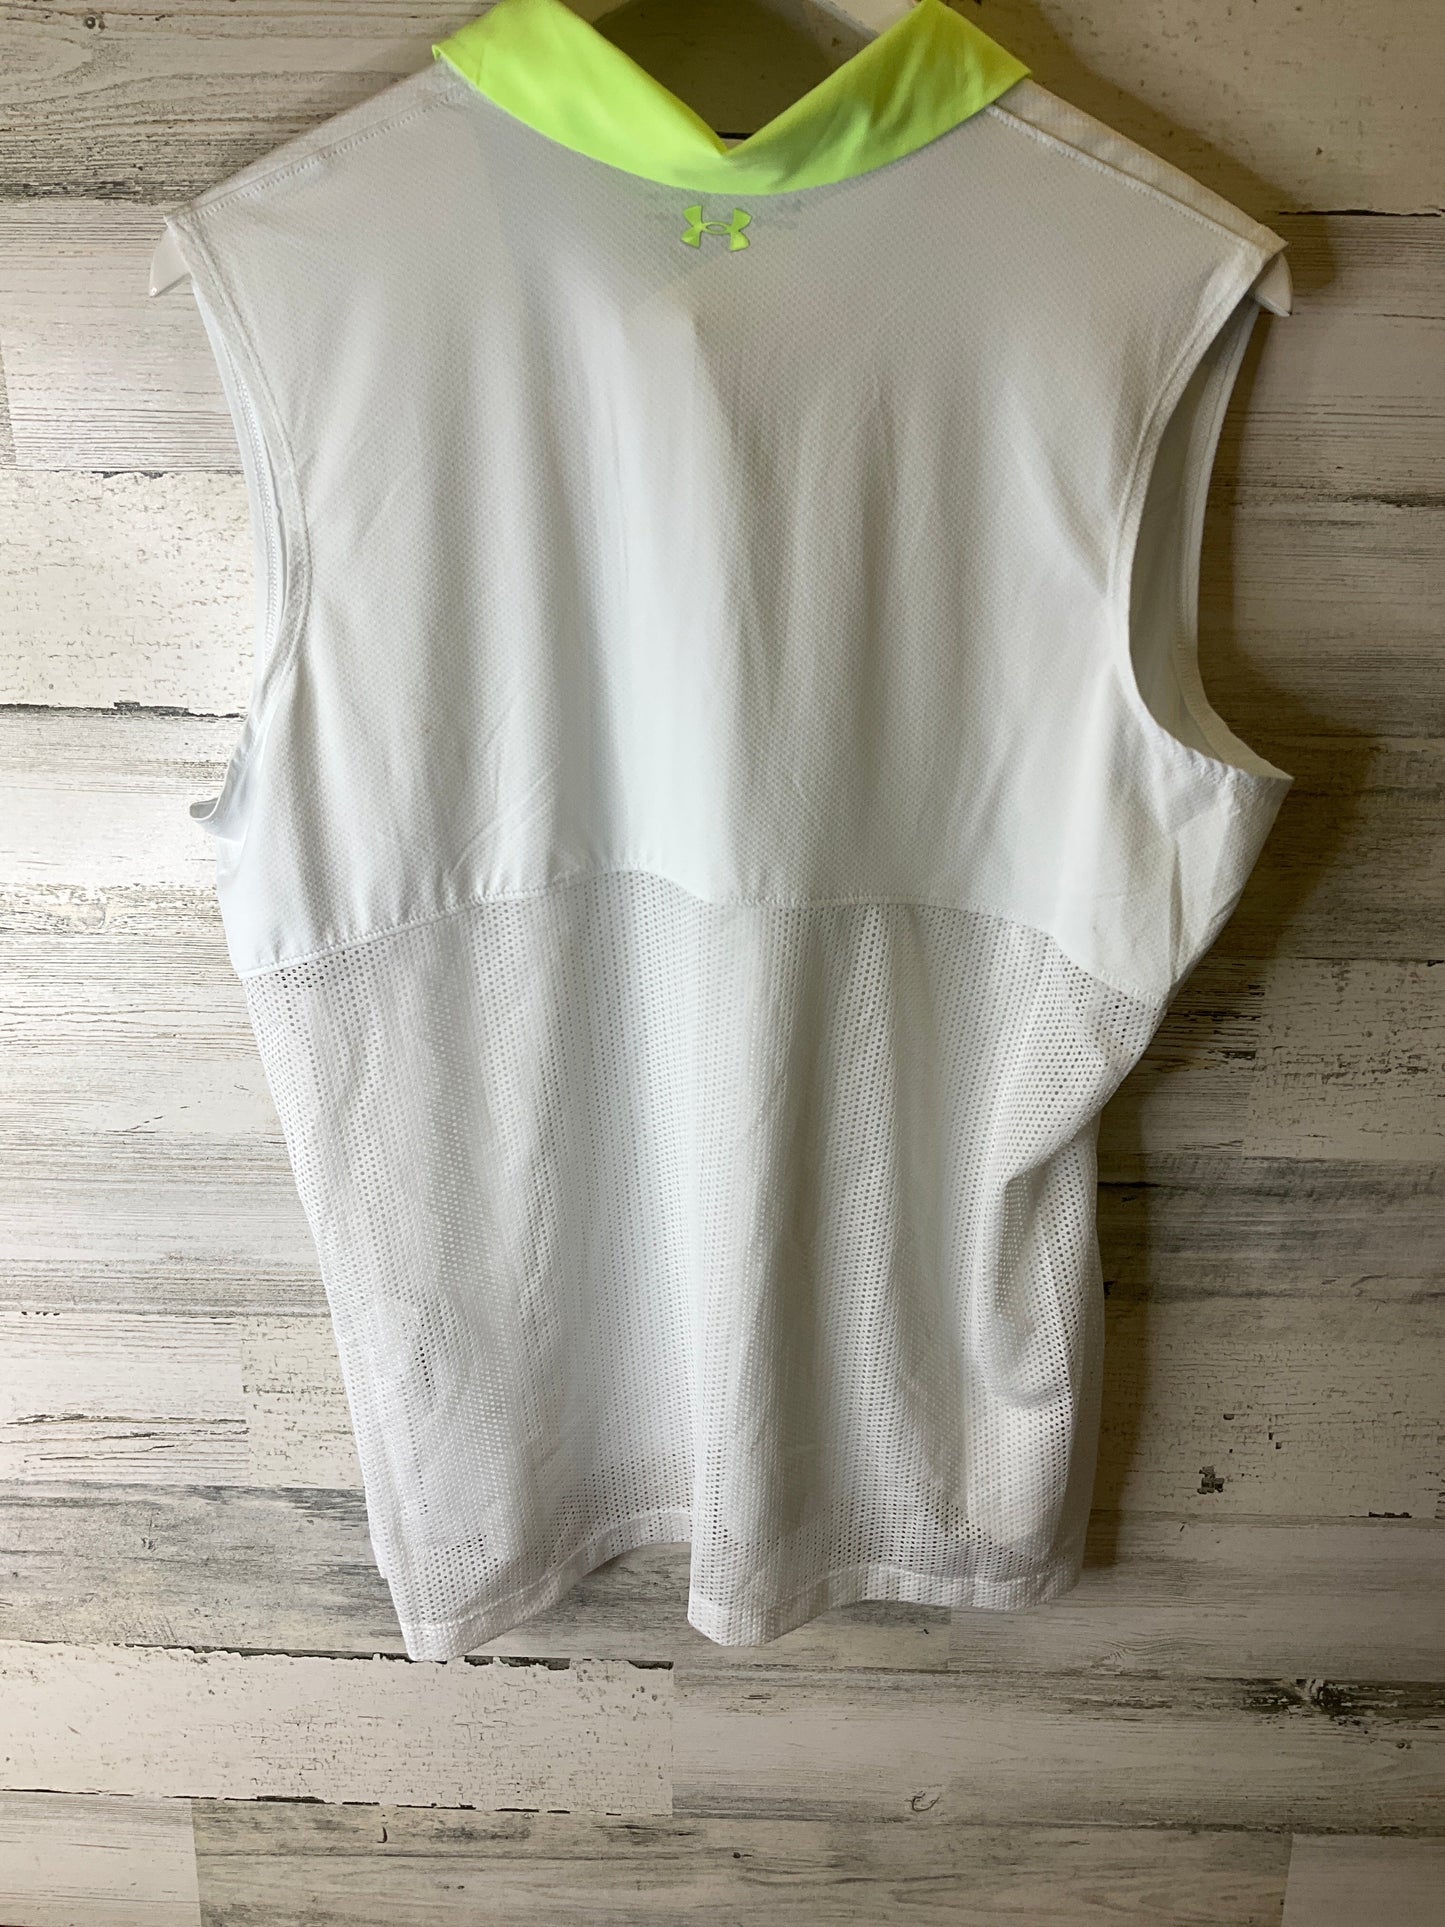 White Athletic Top Short Sleeve Under Armour, Size Xl